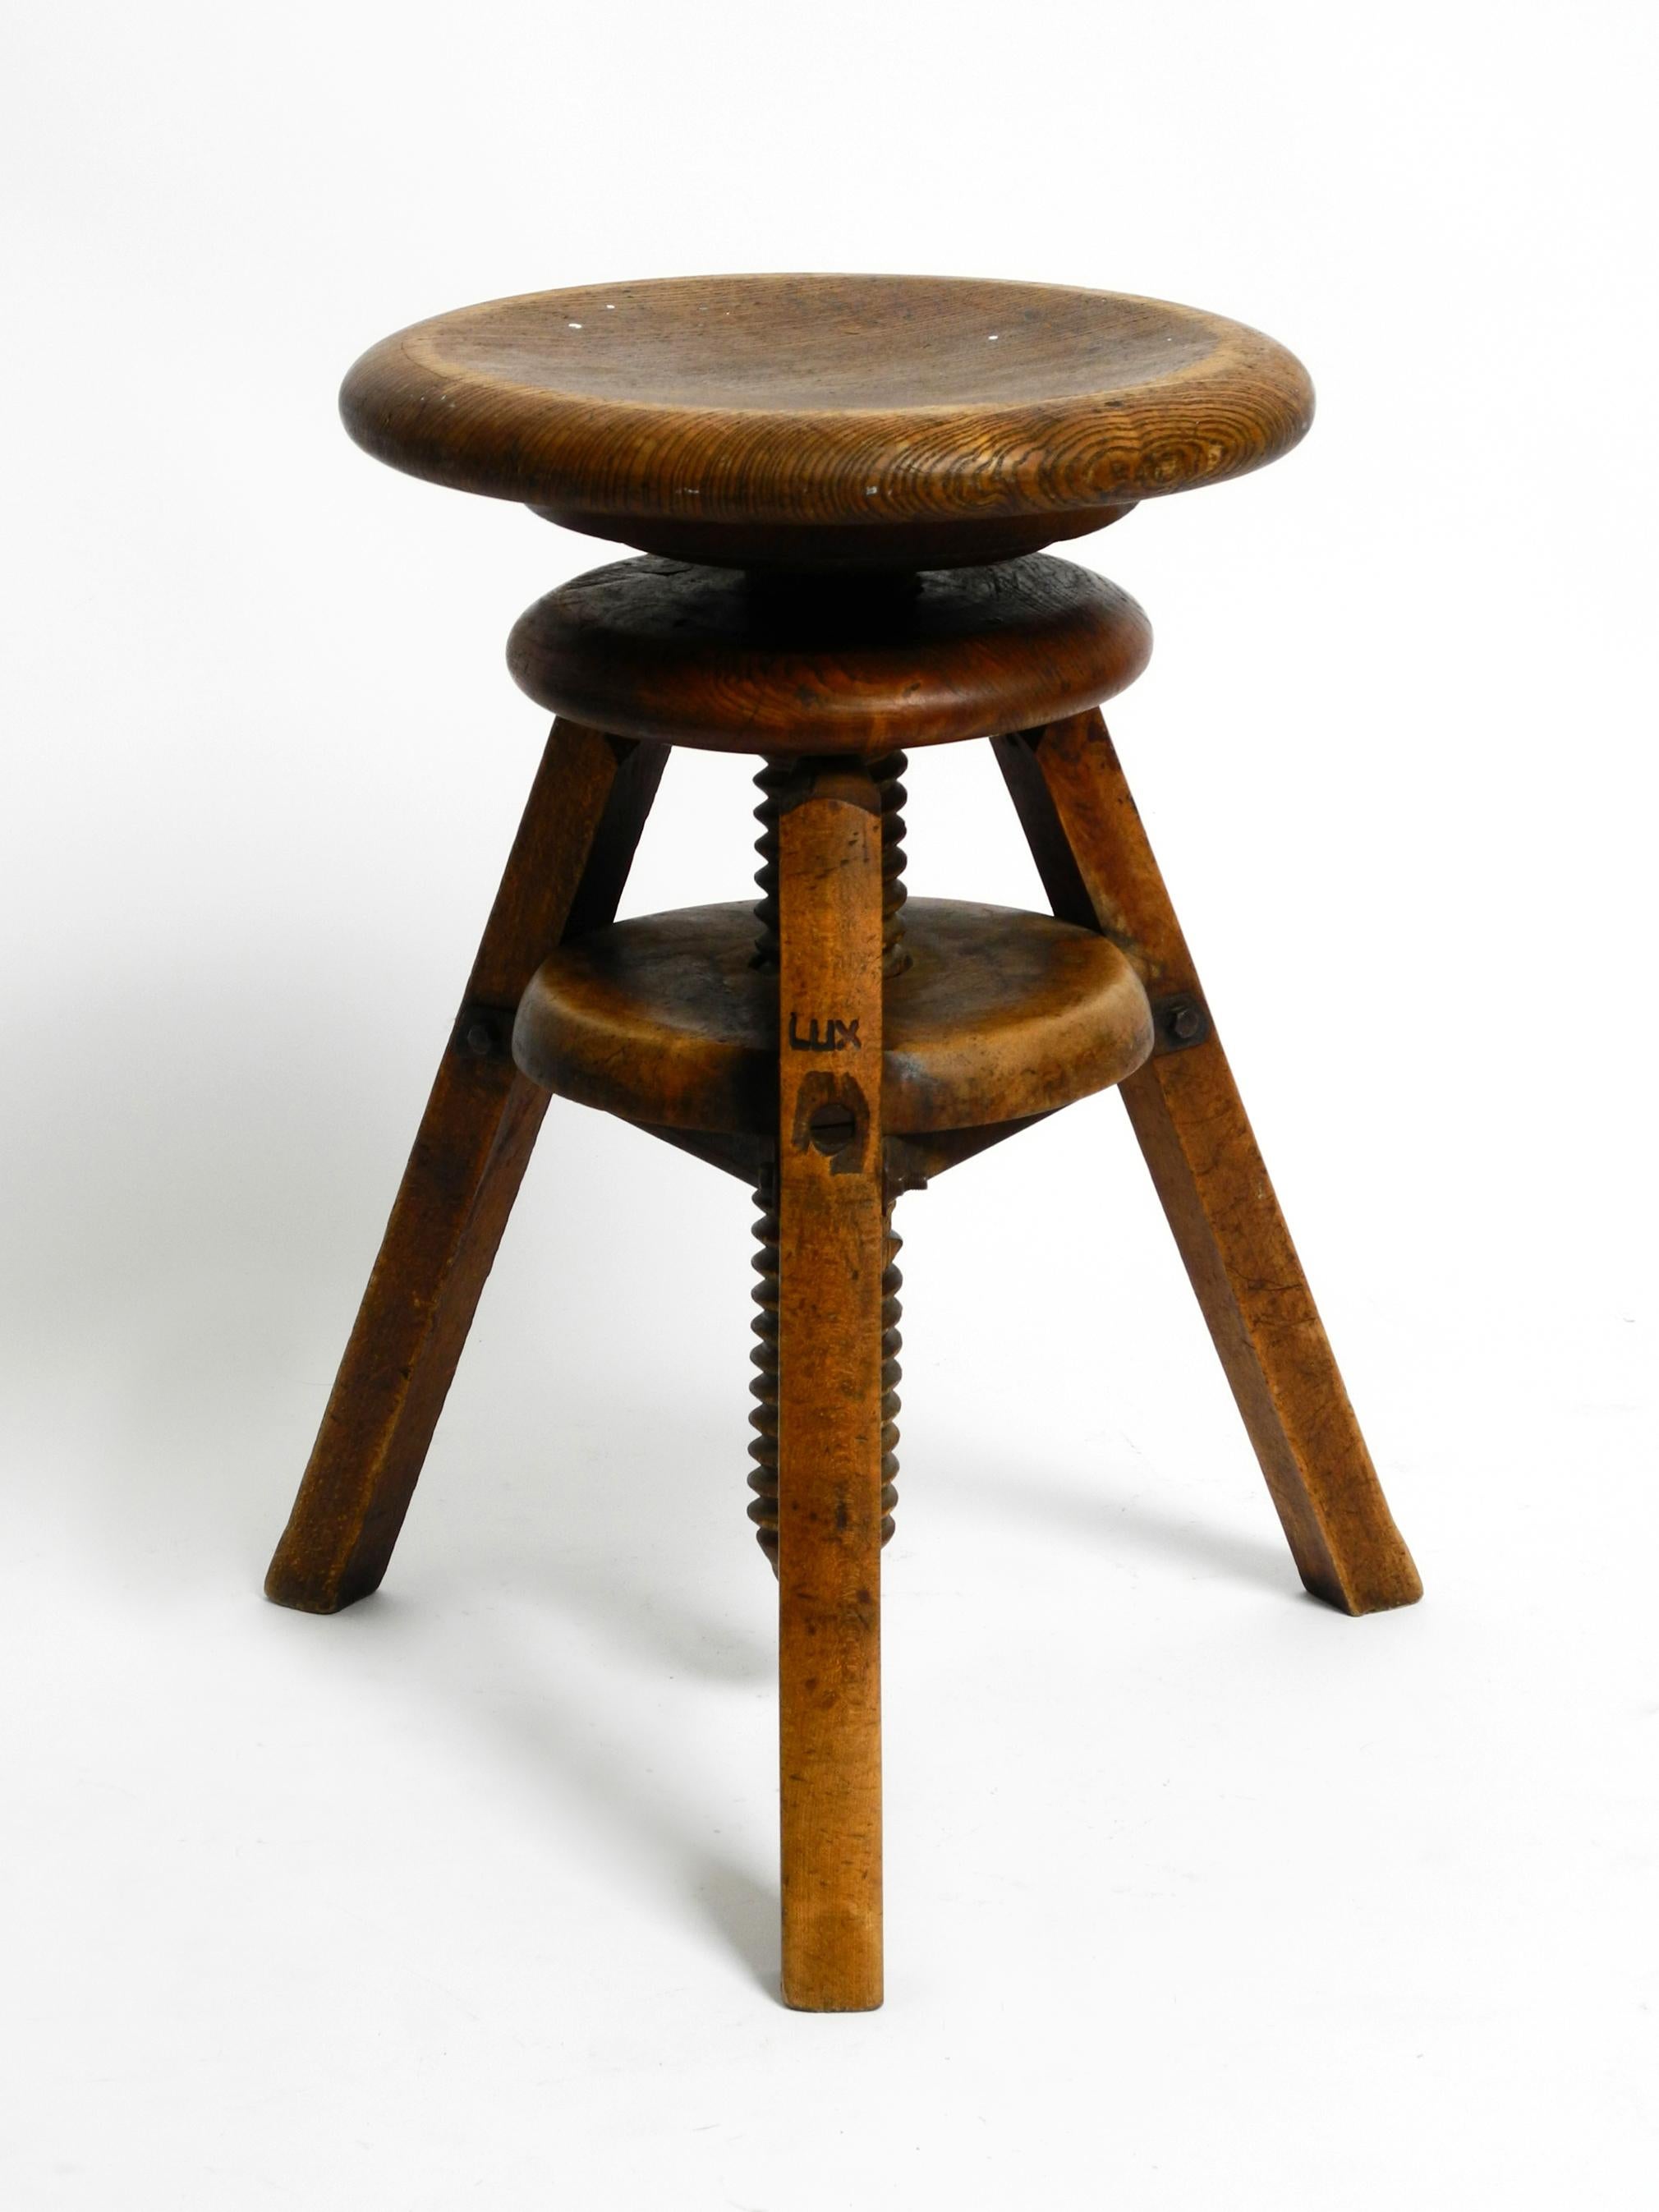 Mid-20th Century Original 30s French industrial swivel stool made of heavy oak